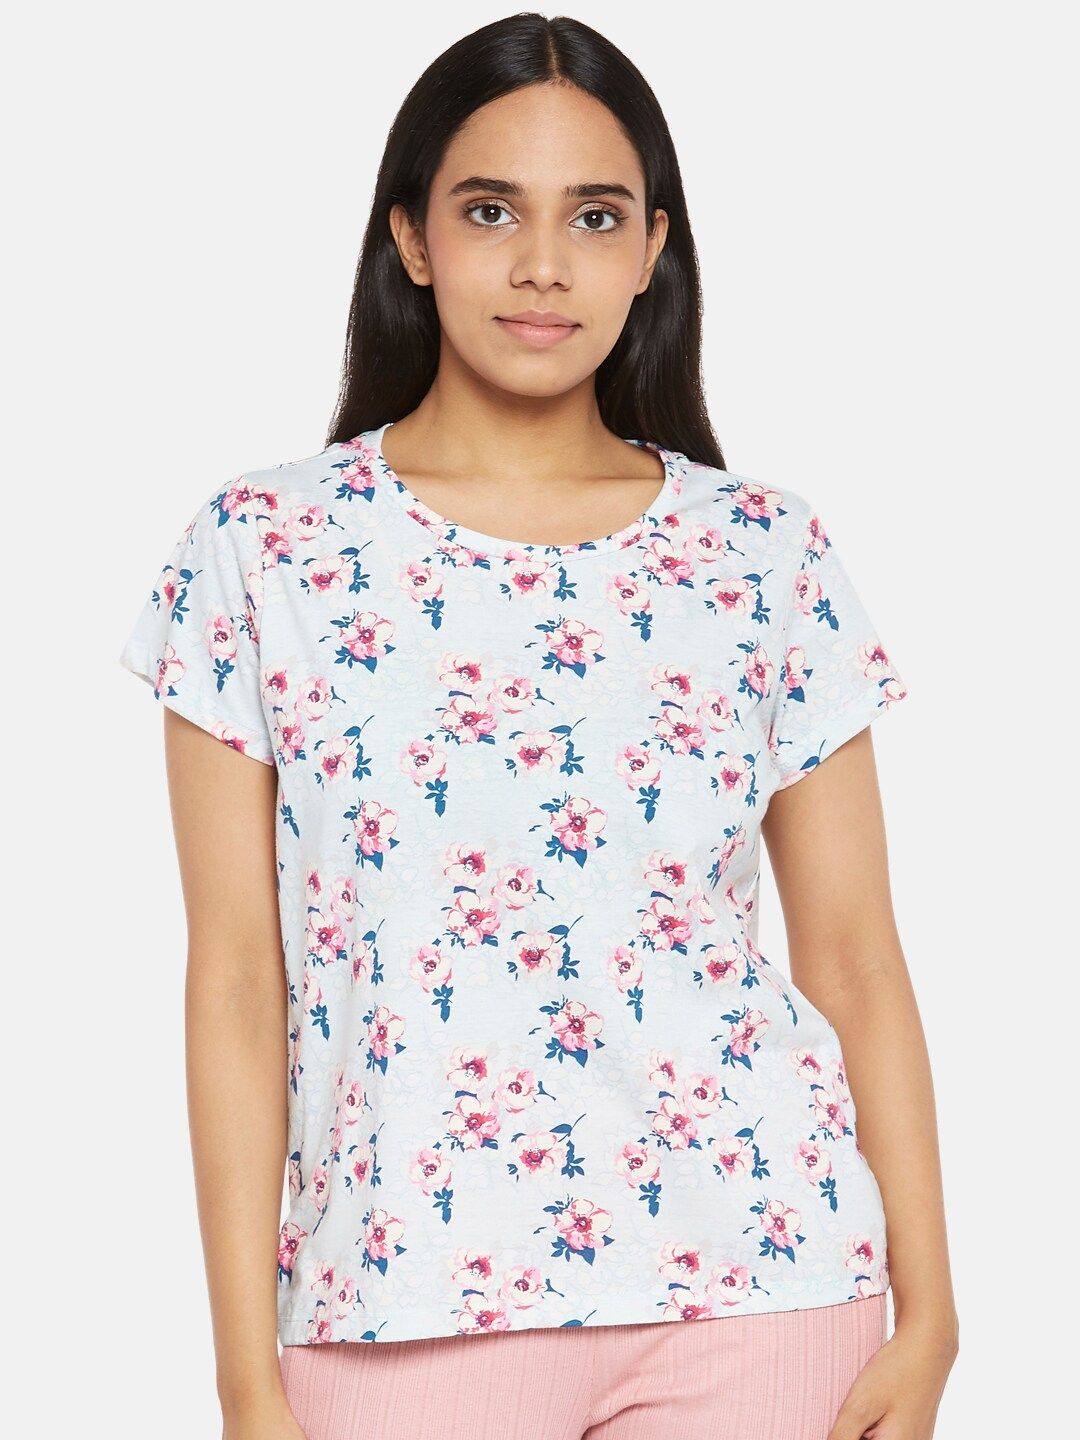 Dreamz by Pantaloons Women Blue & Pink Floral Printed Cotton Lounge T-shirt Price in India